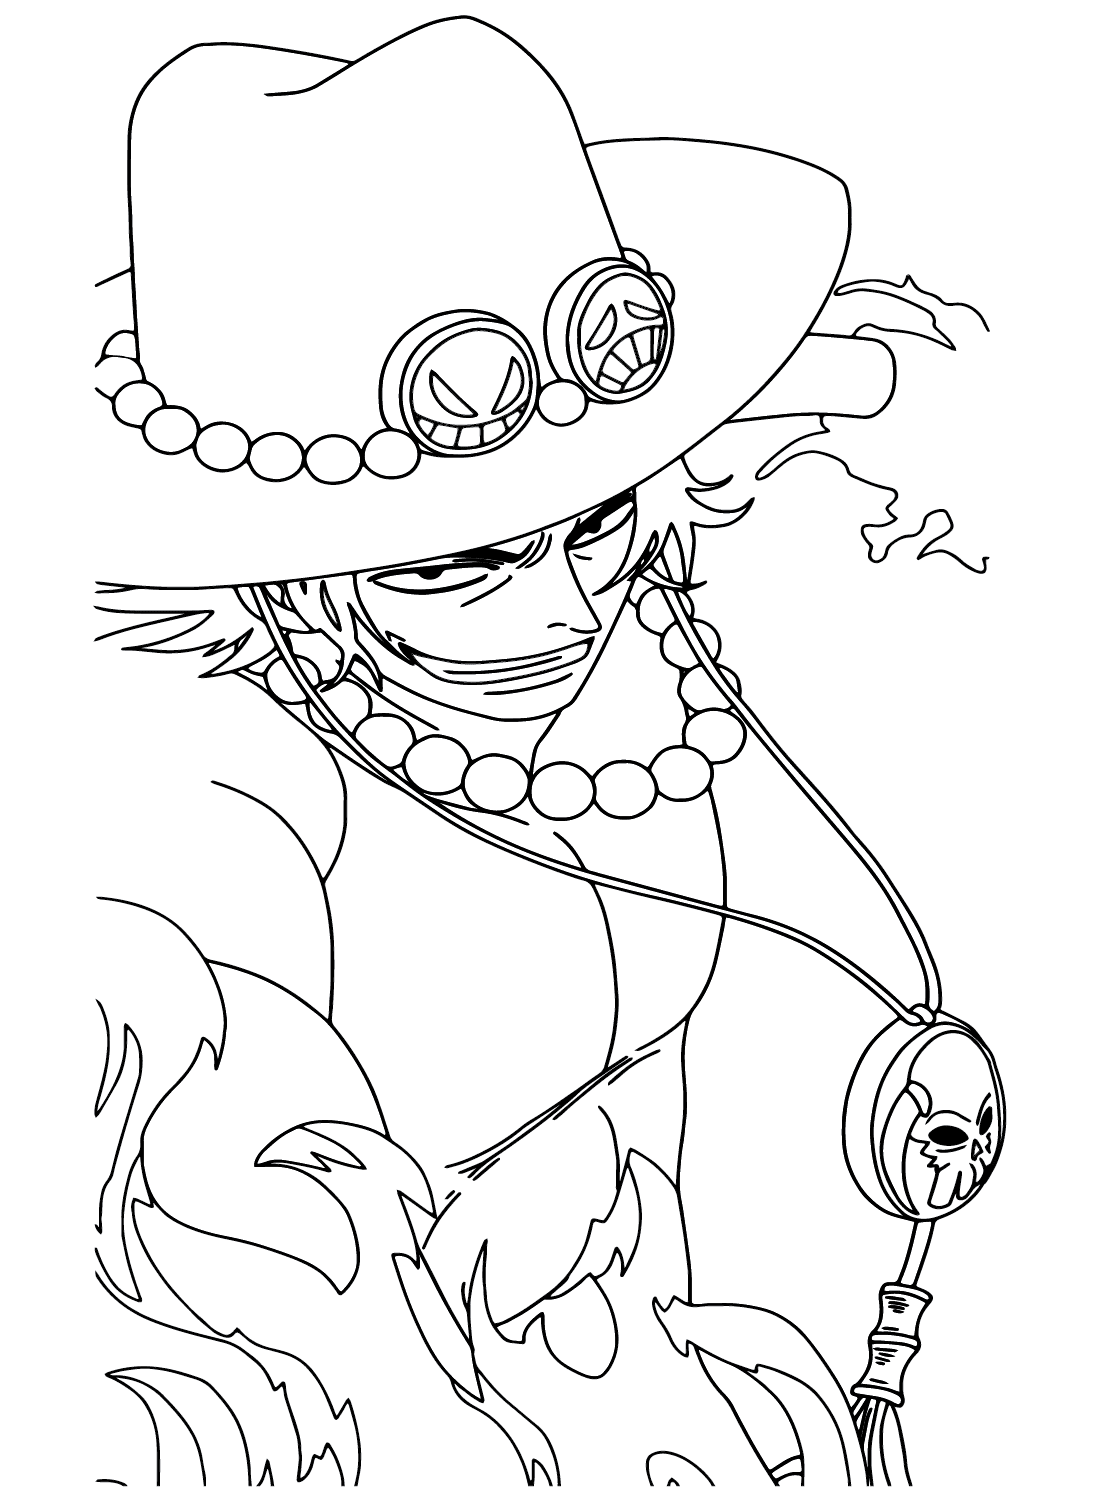 Coloring Page One Piece Portgas D. Ace from Portgas D. Ace